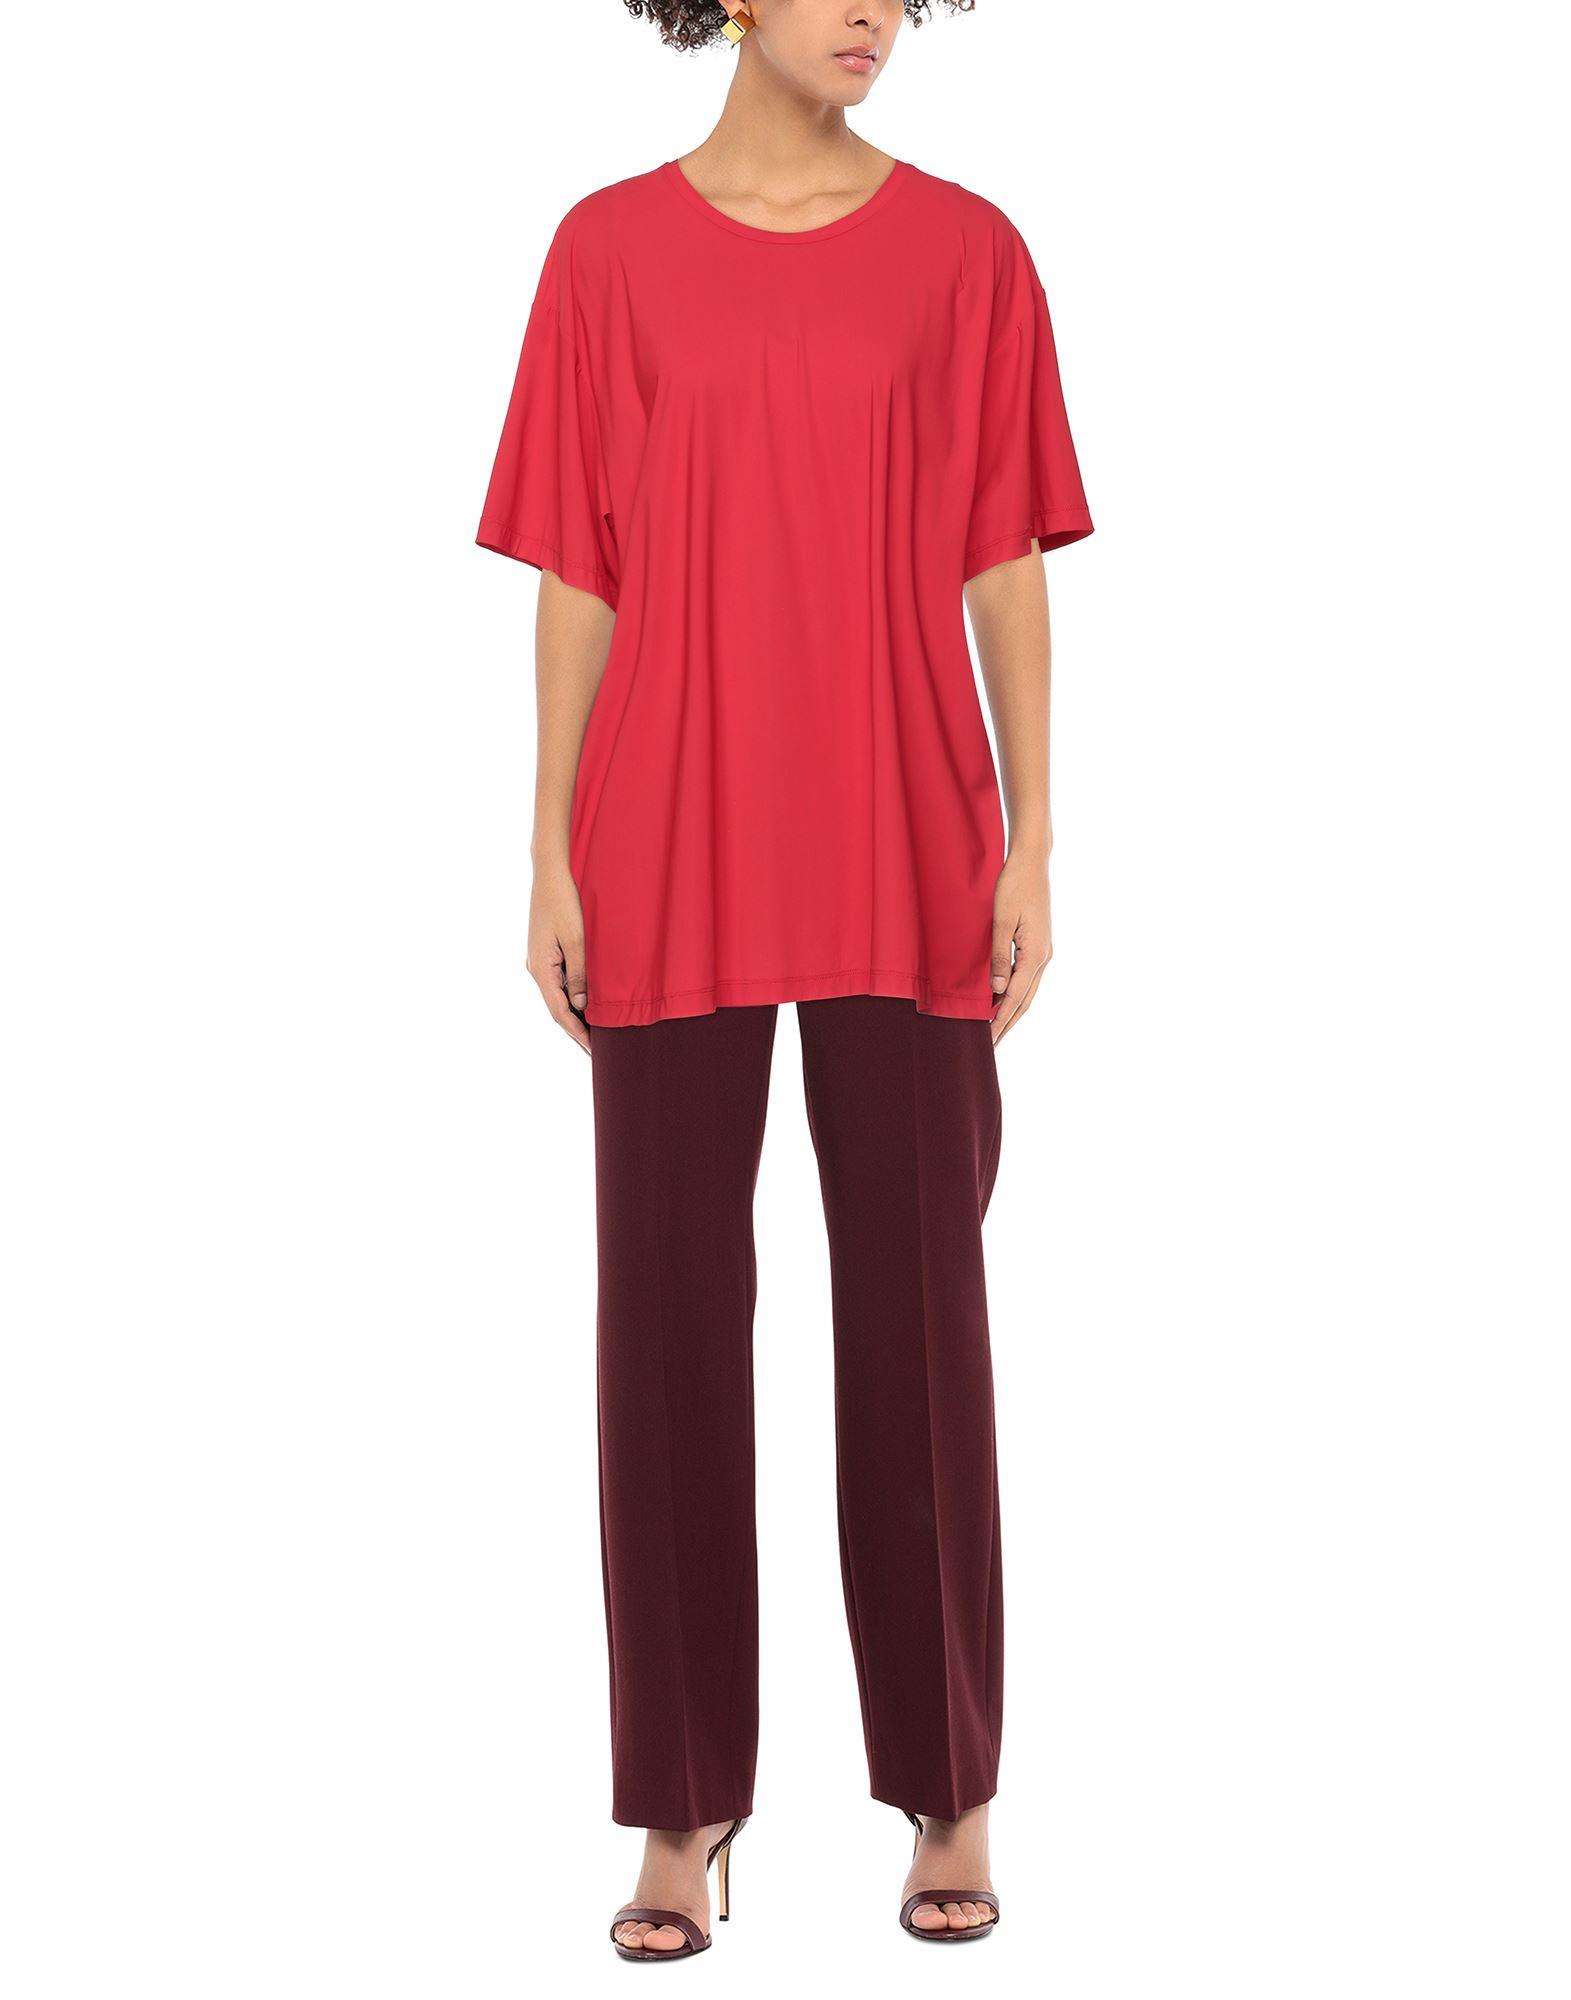 MM6 by Maison Martin Margiela T-shirt in Red - Lyst